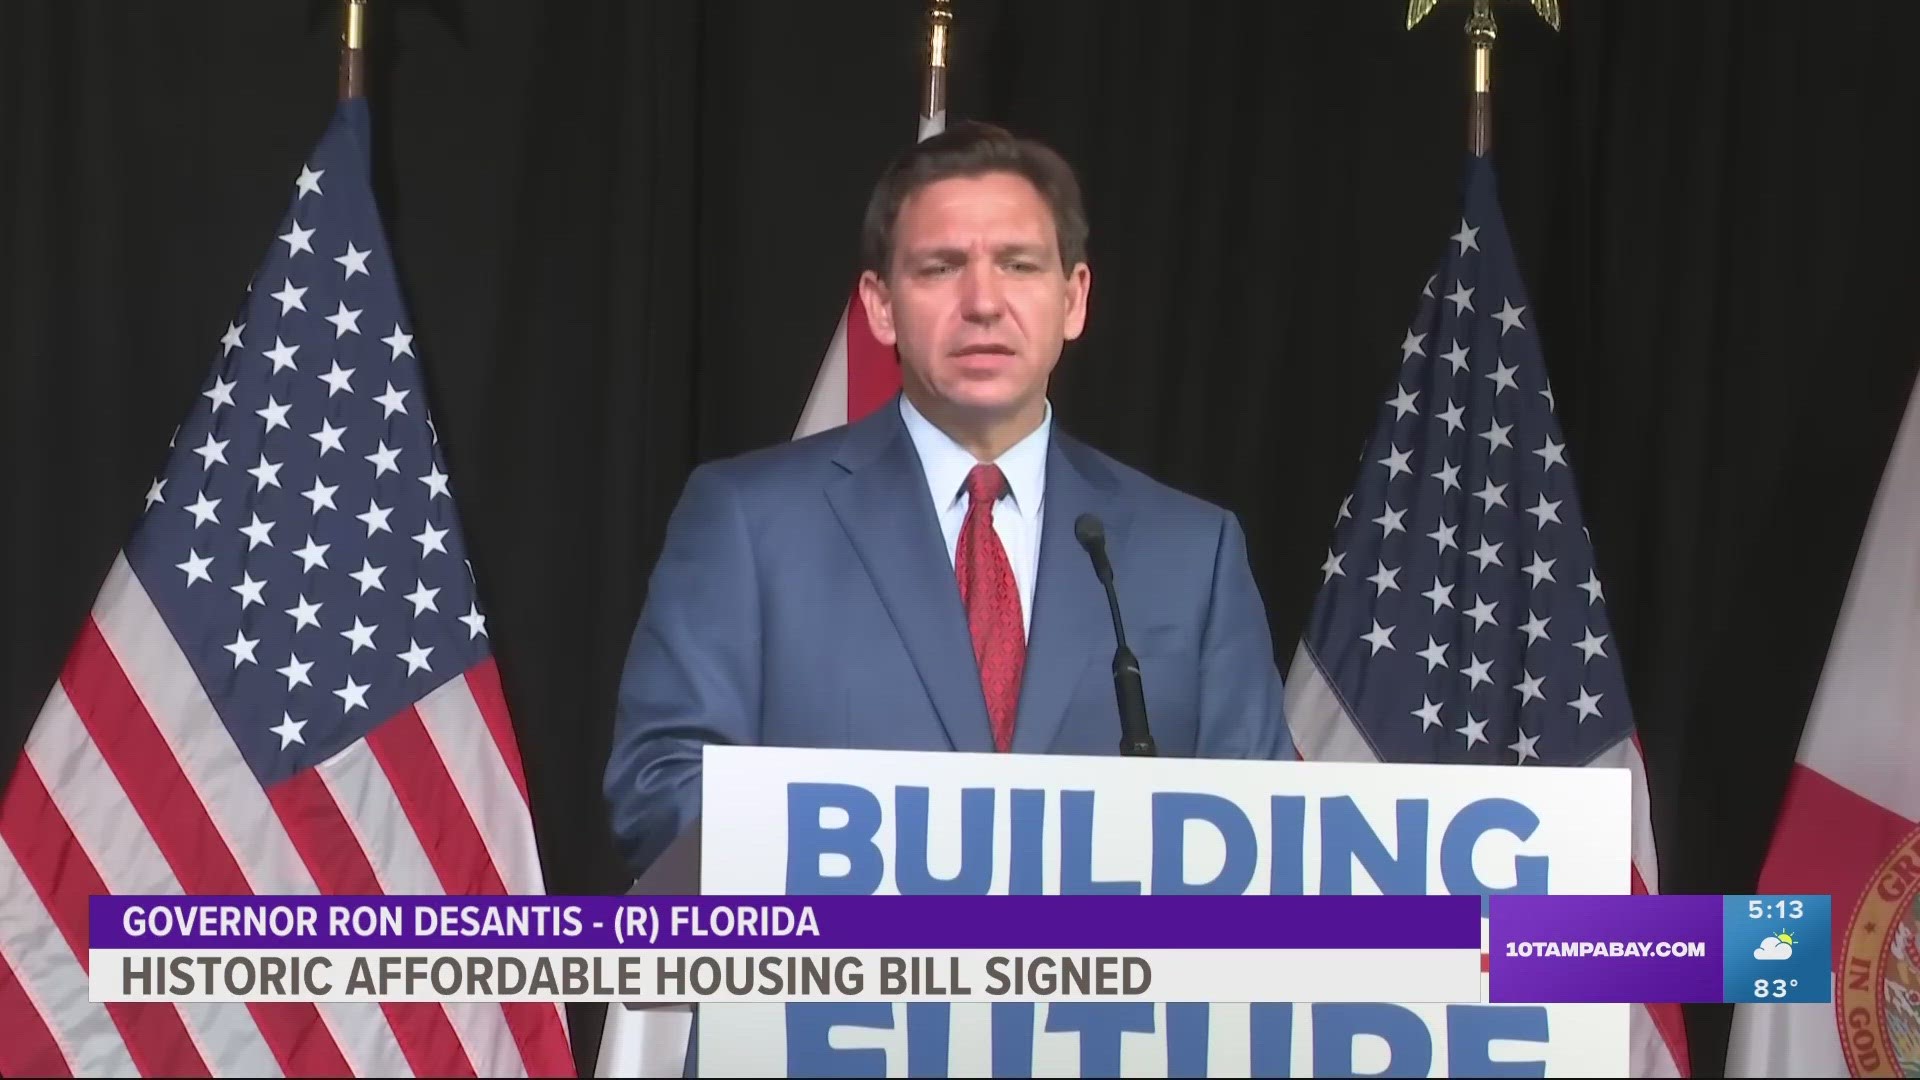 The goal of the legislation is "to be able to help Floridians live in the communities where they work," according to DeSantis.